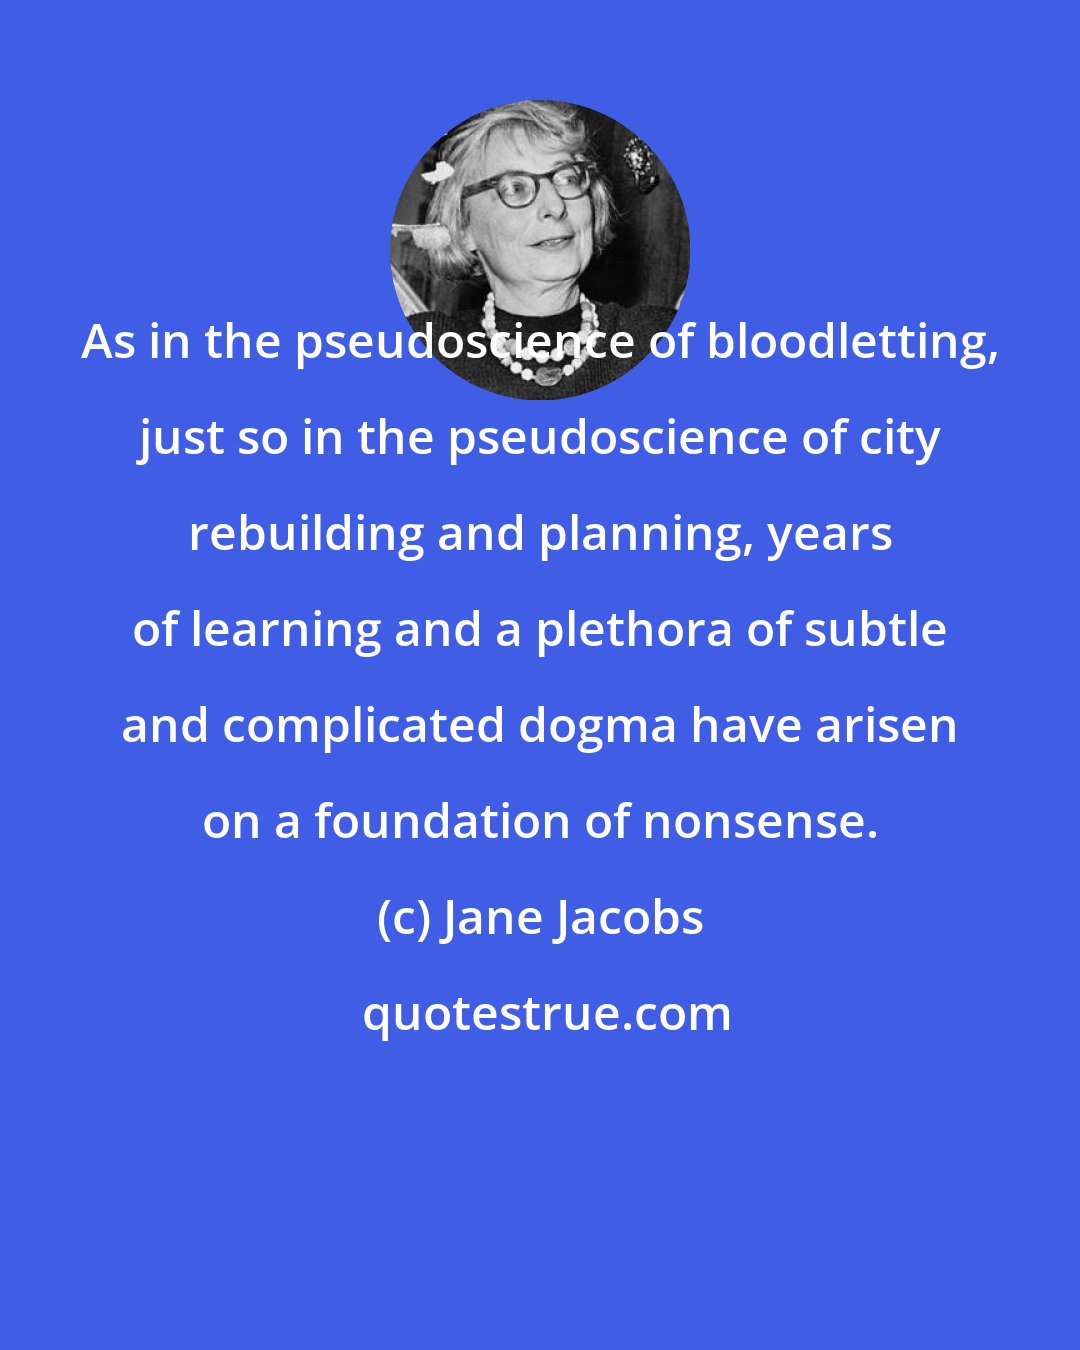 Jane Jacobs: As in the pseudoscience of bloodletting, just so in the pseudoscience of city rebuilding and planning, years of learning and a plethora of subtle and complicated dogma have arisen on a foundation of nonsense.